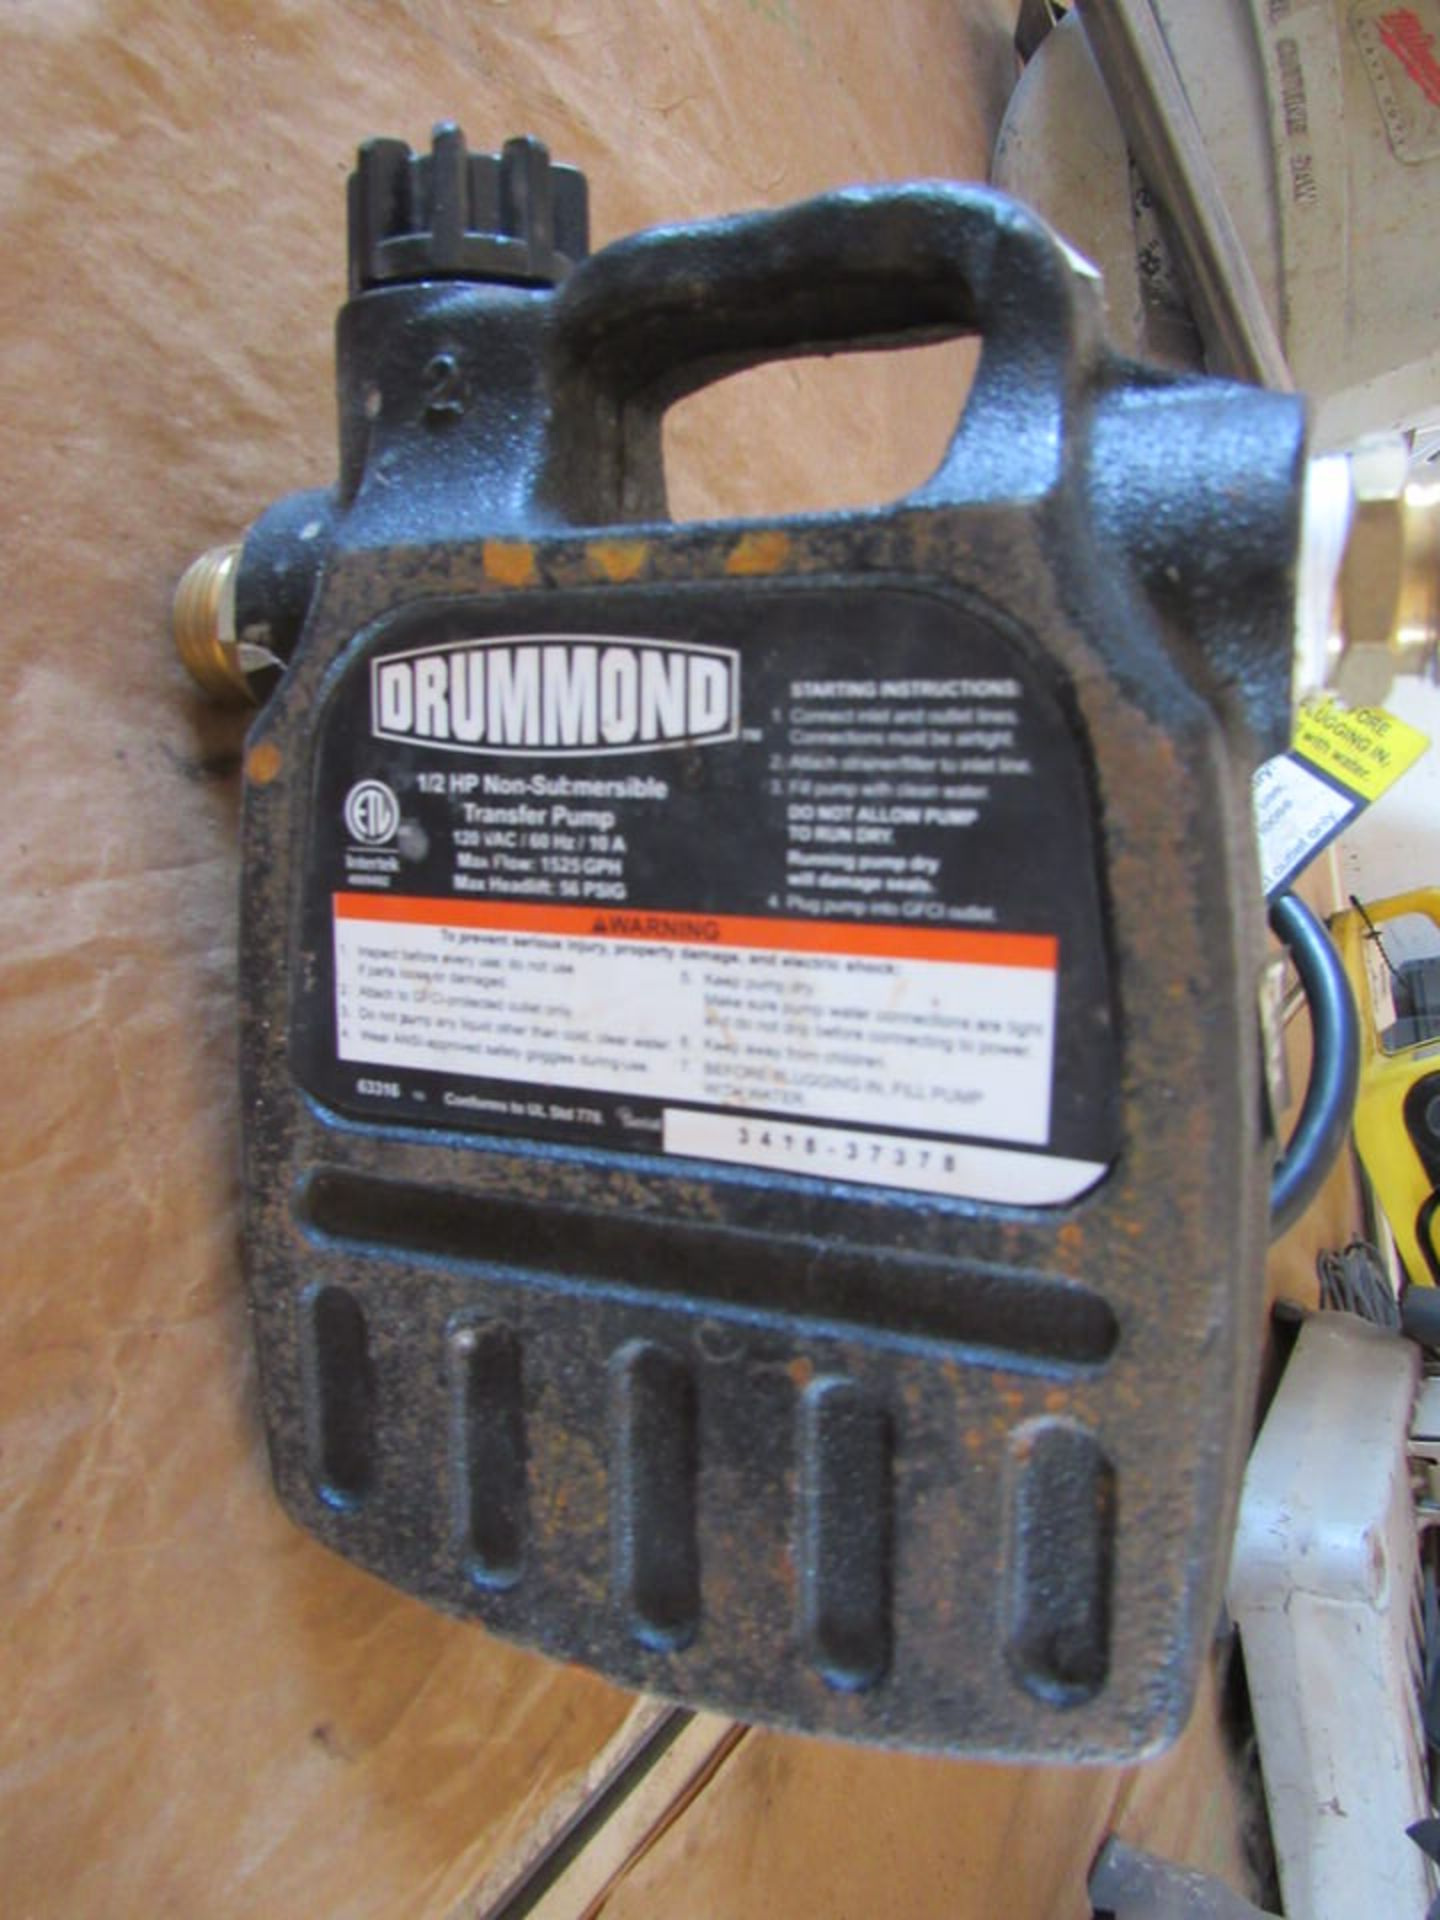 One Drumond 1/2 HP Non-Submersible Transfer Pump, S/N 3418-37378 - Image 2 of 2